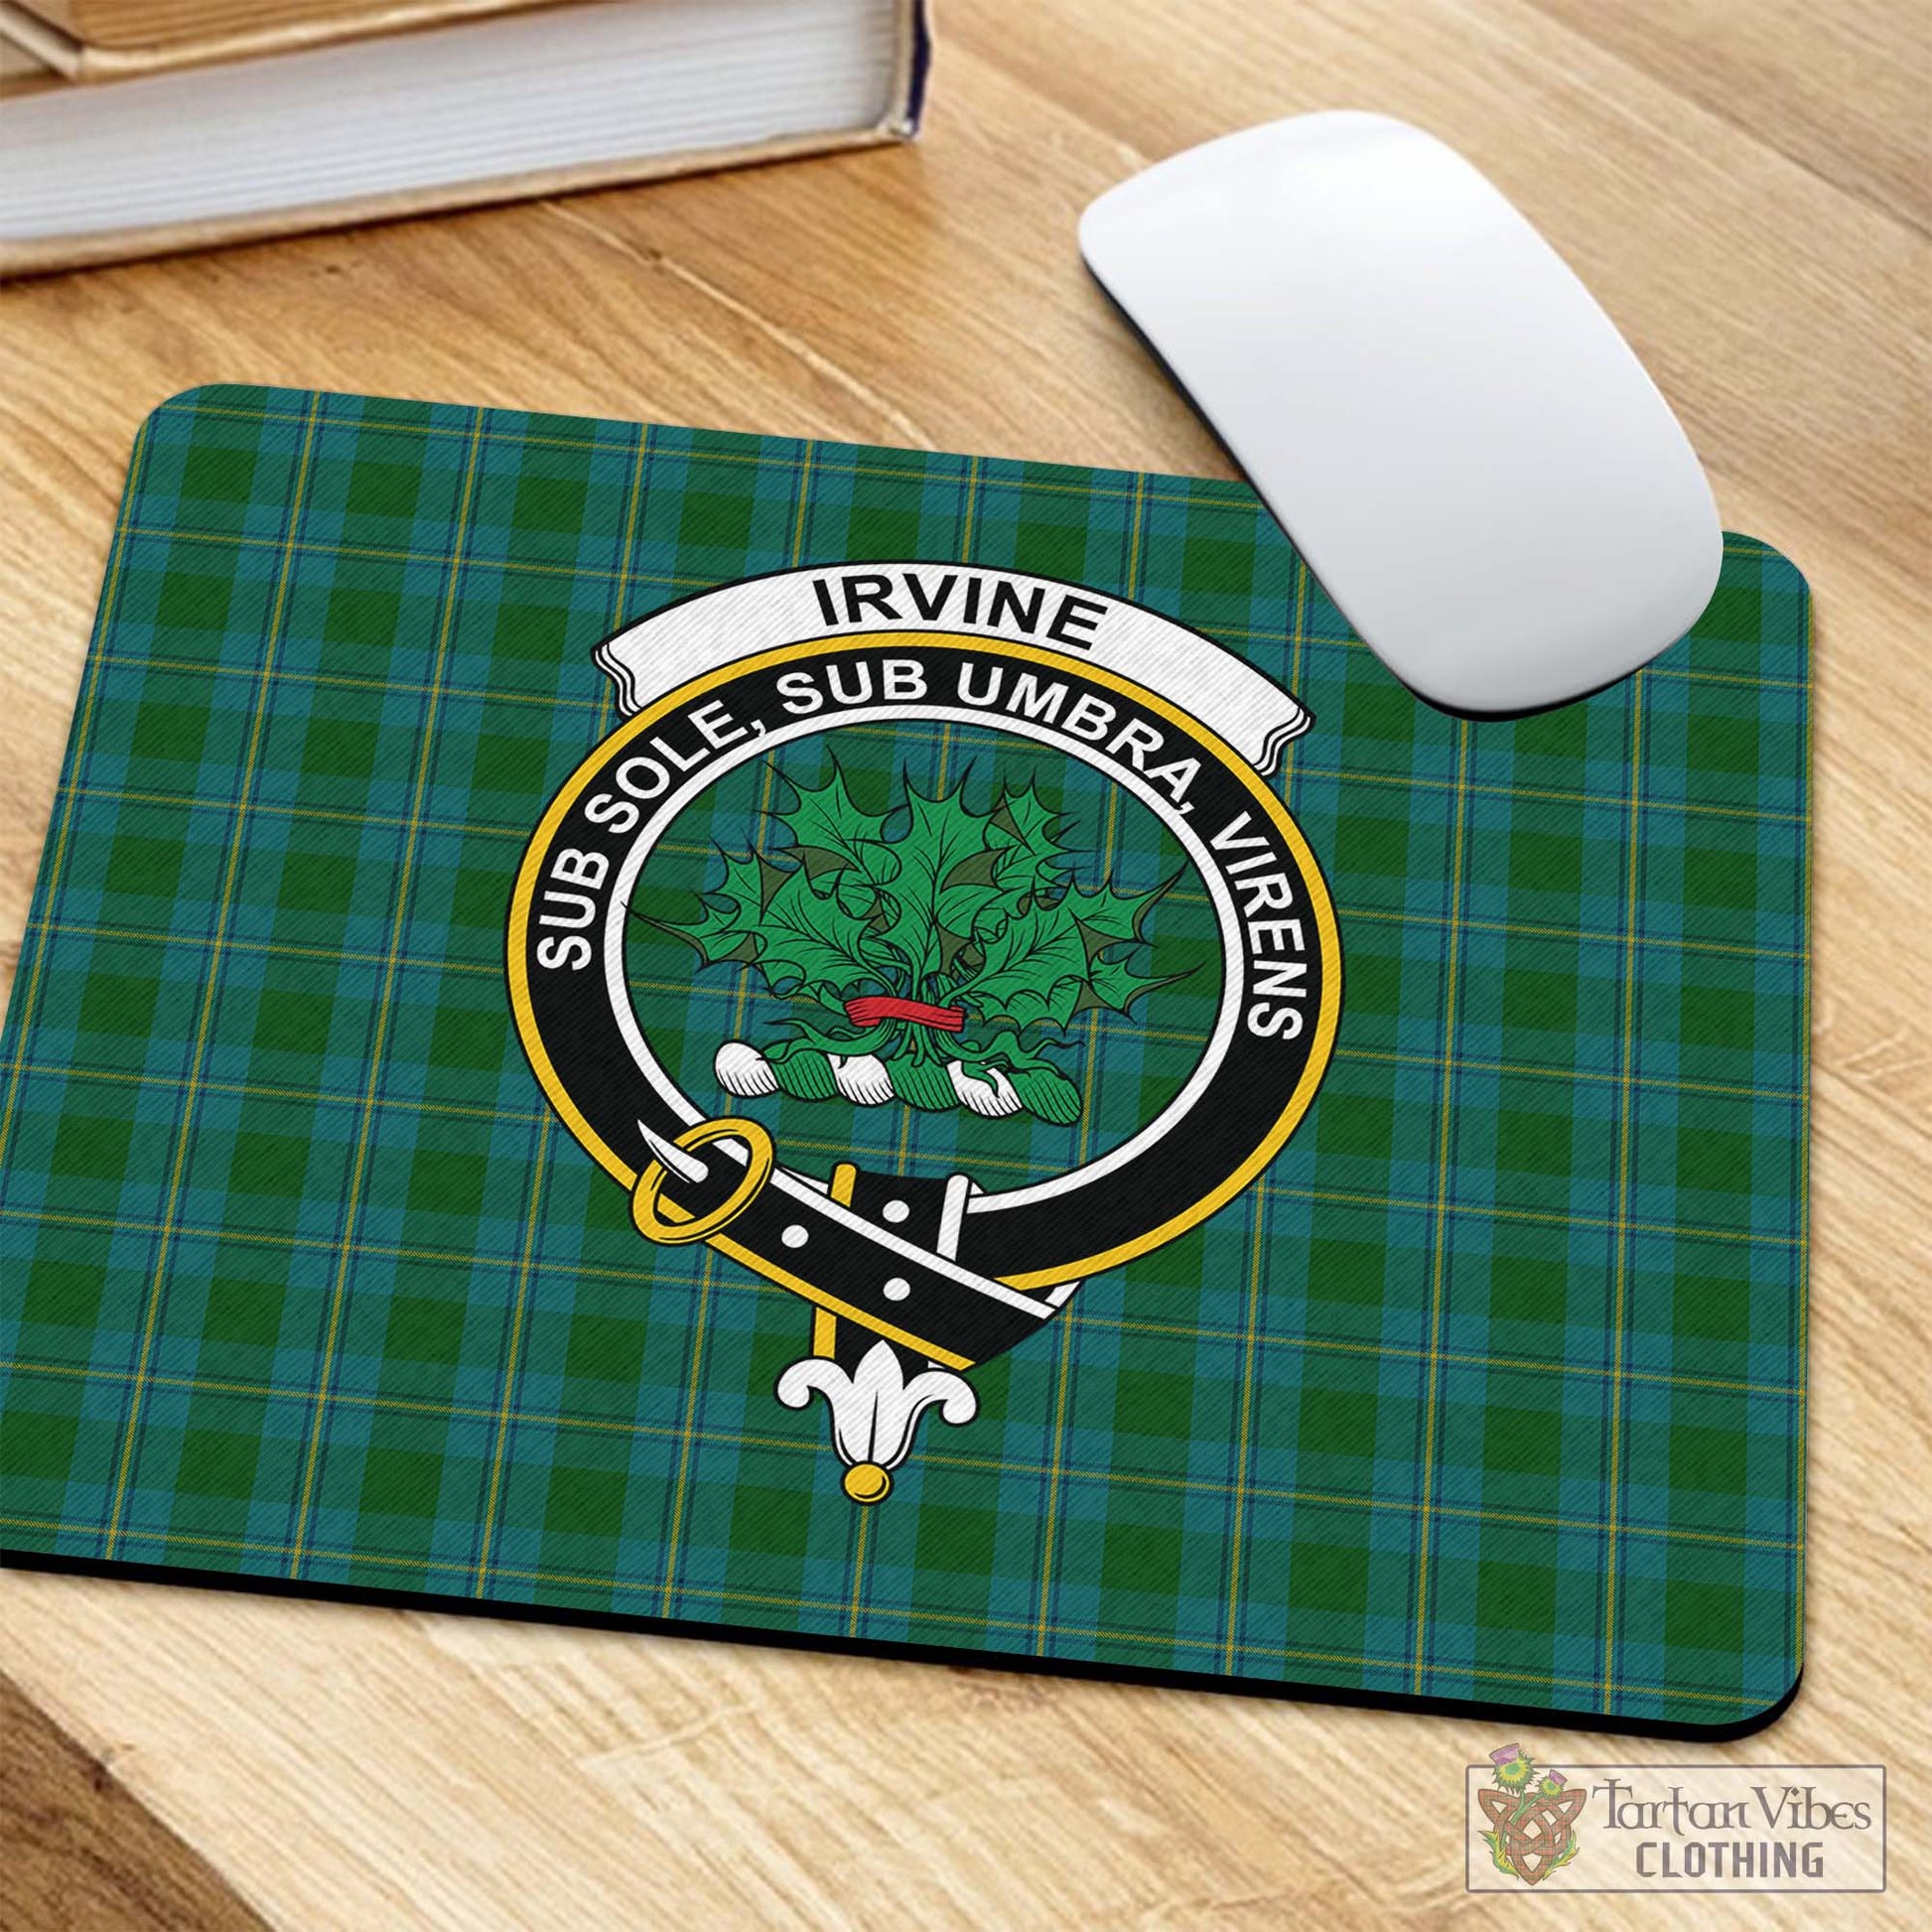 Tartan Vibes Clothing Irvine of Bonshaw Tartan Mouse Pad with Family Crest